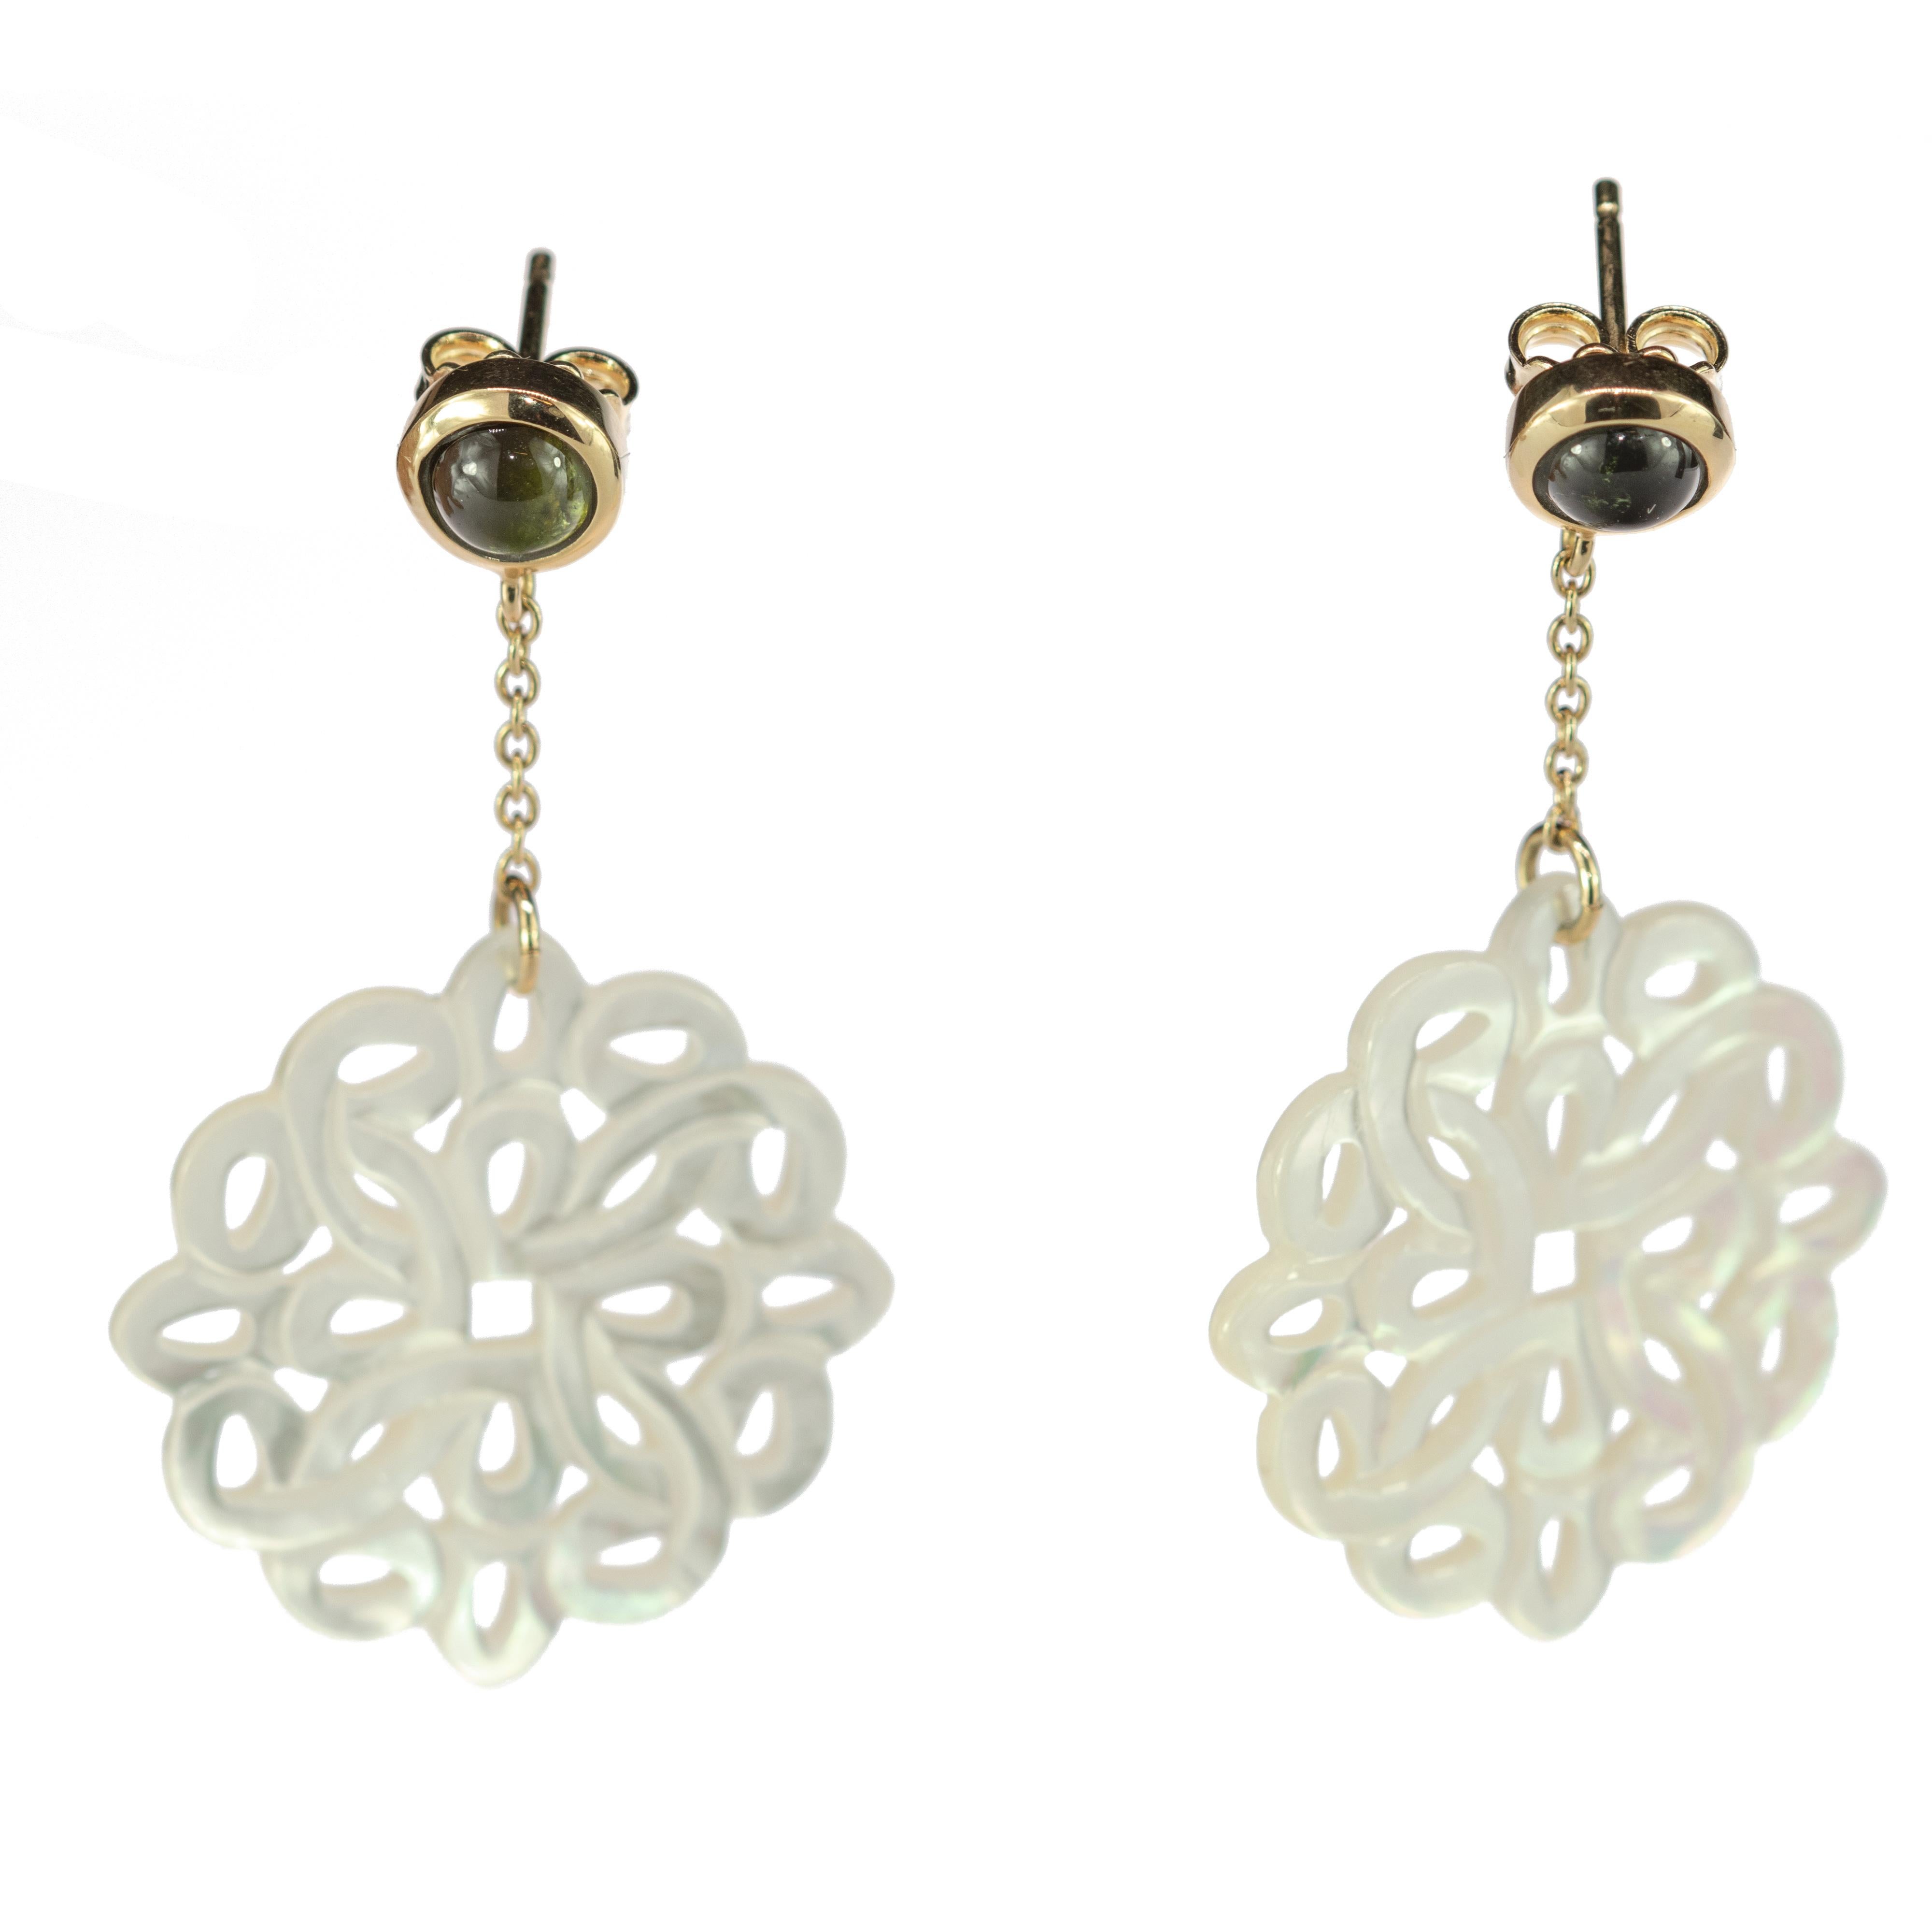 Green peridot dangle earrings connected to a delicate 18 k gold chain that ends in a perfectly crafted round mother of pearl design evoking the details and italian history across the whole shape.

This design is inspired by the Greek jewelry. In the